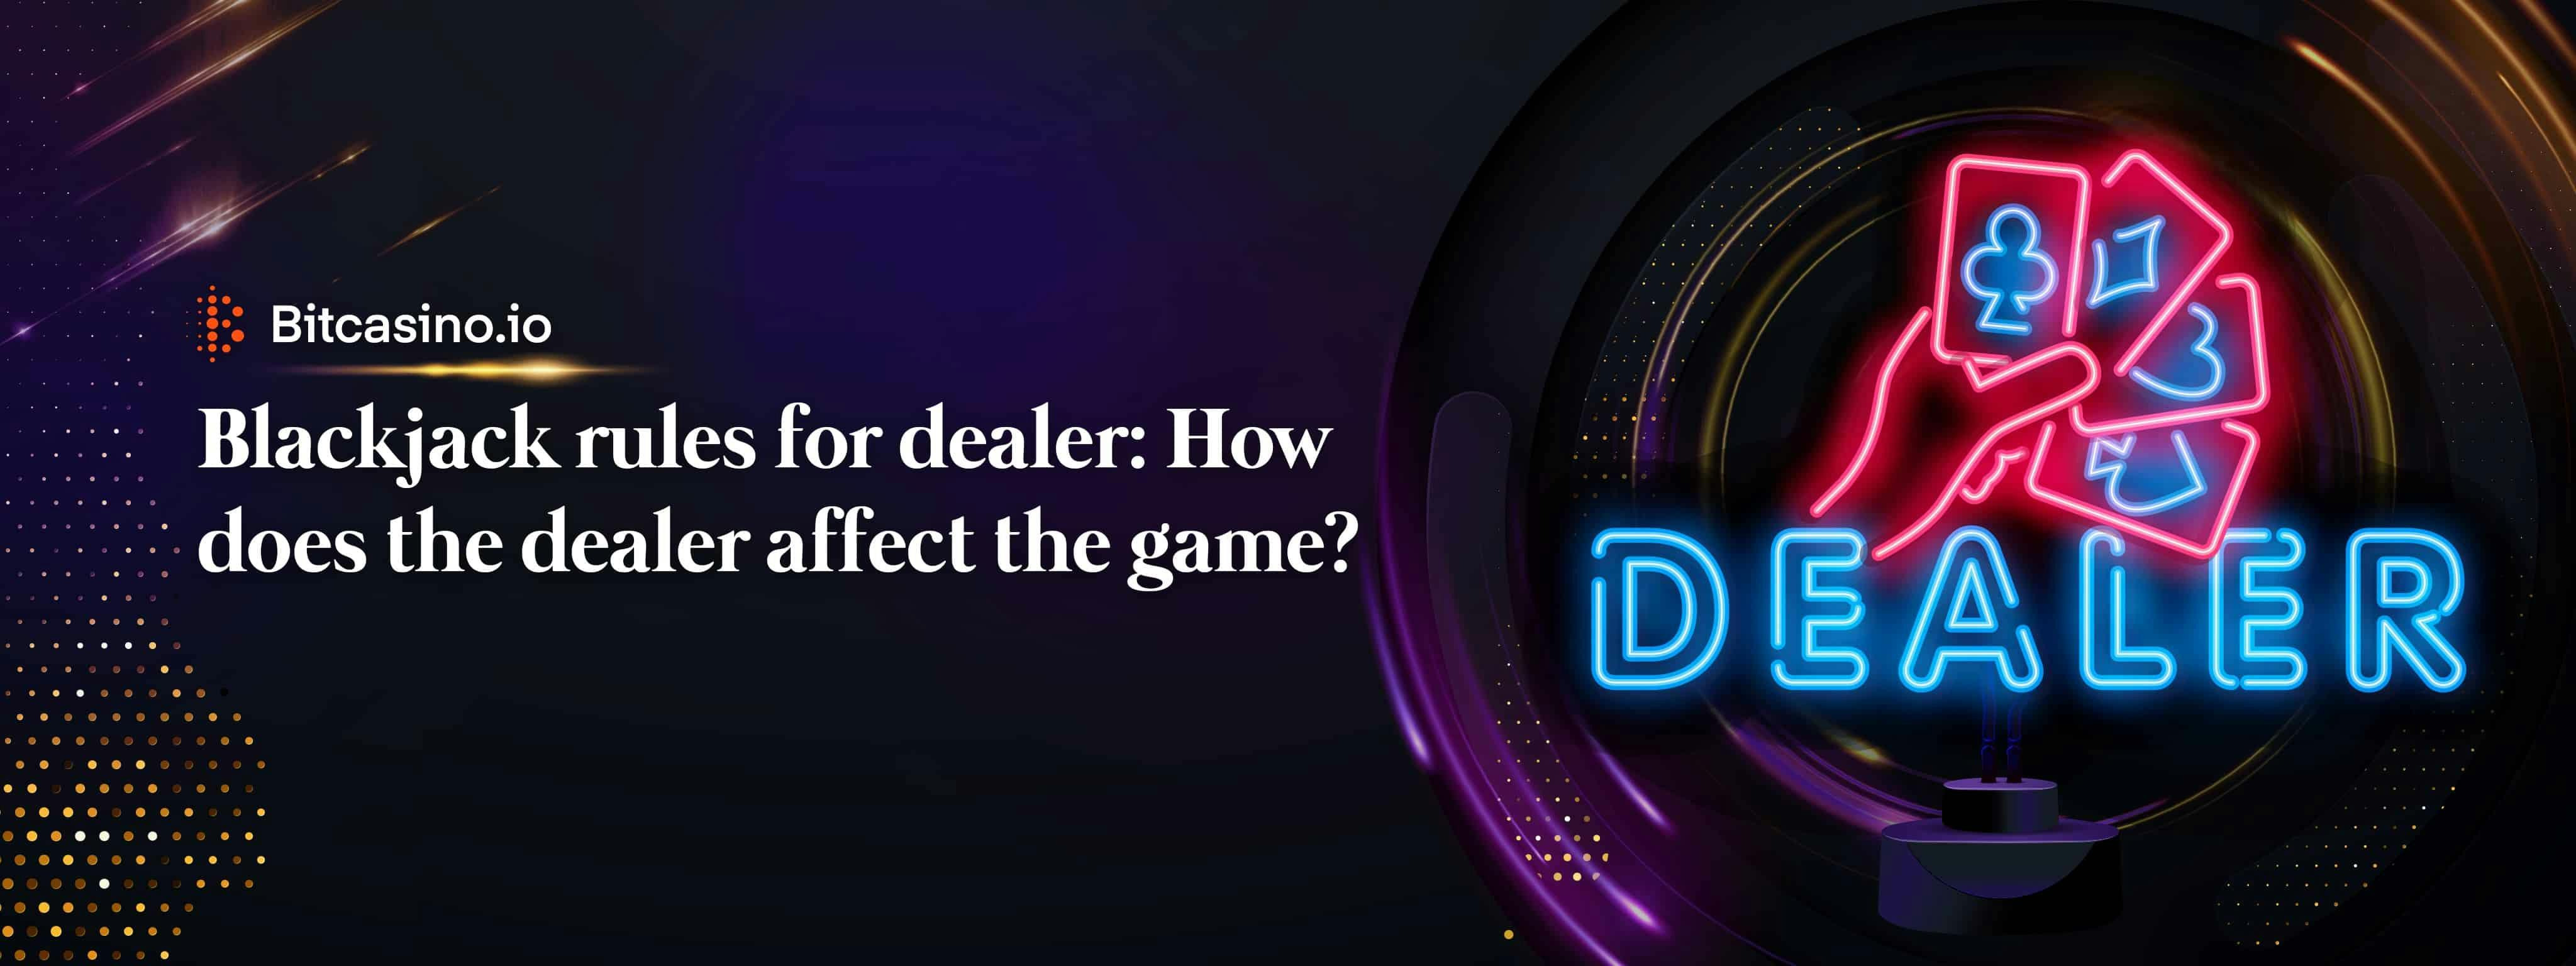 Blackjack rules for dealers: How does the dealer affect the game?